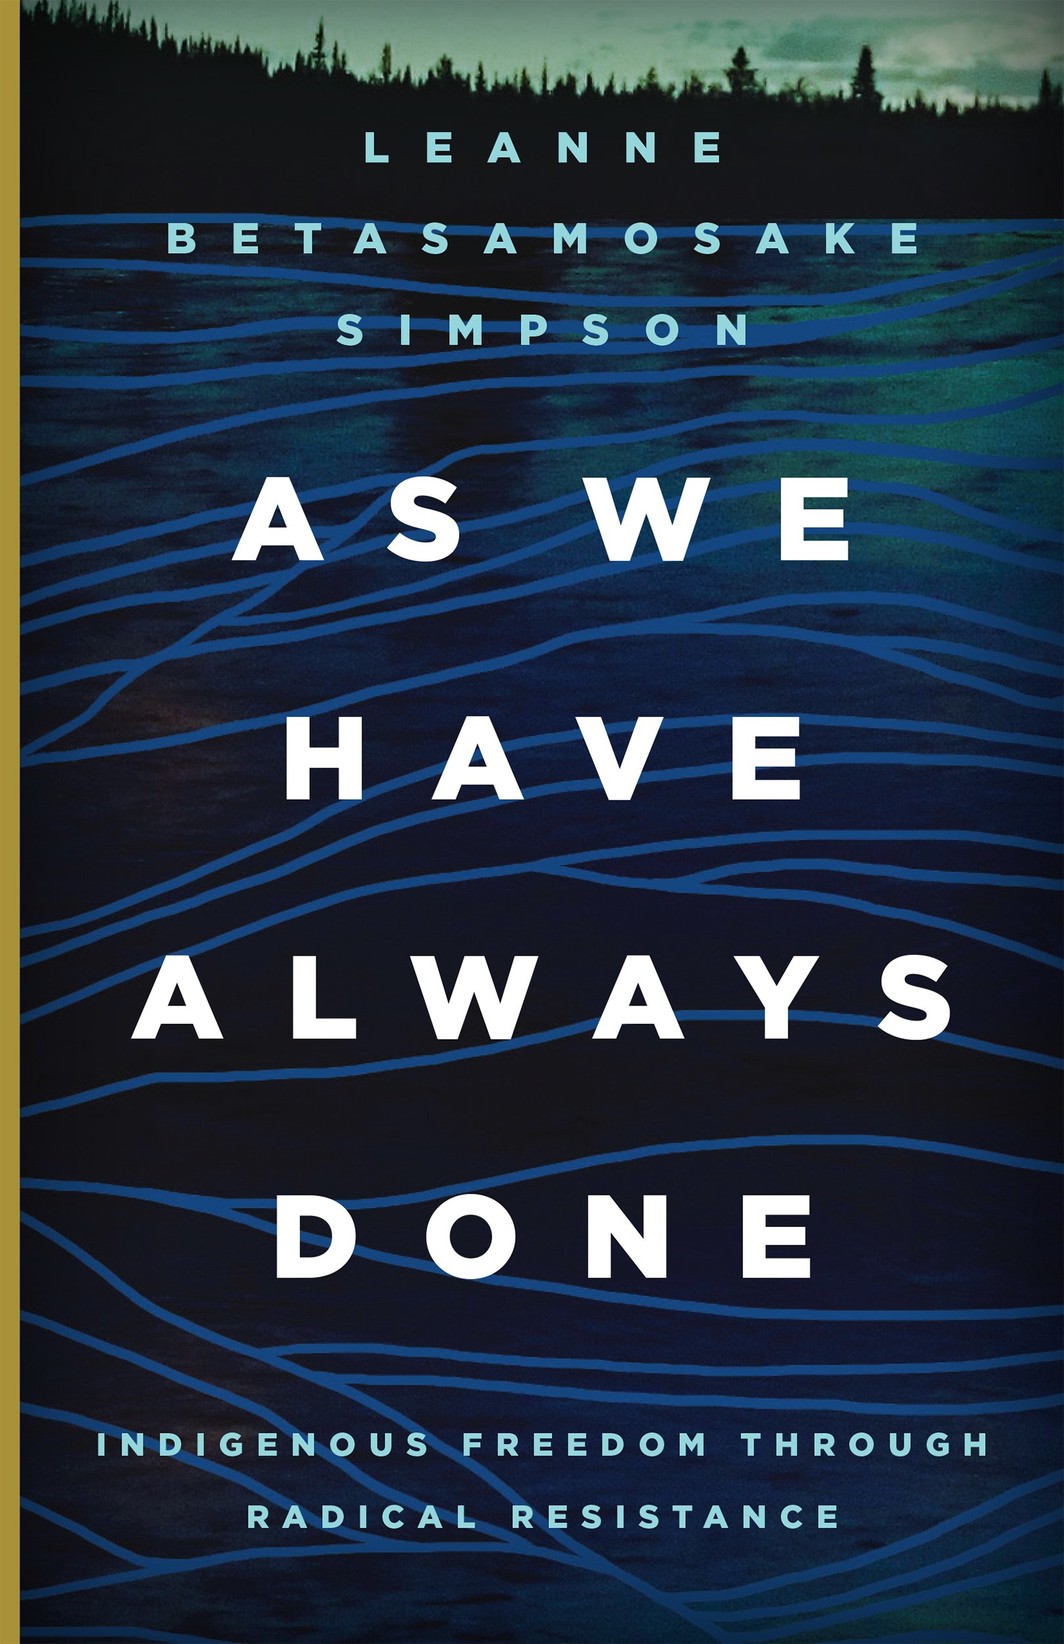 The cover of As We Have Always Done: Indigenous Freedom through Radical Resistance